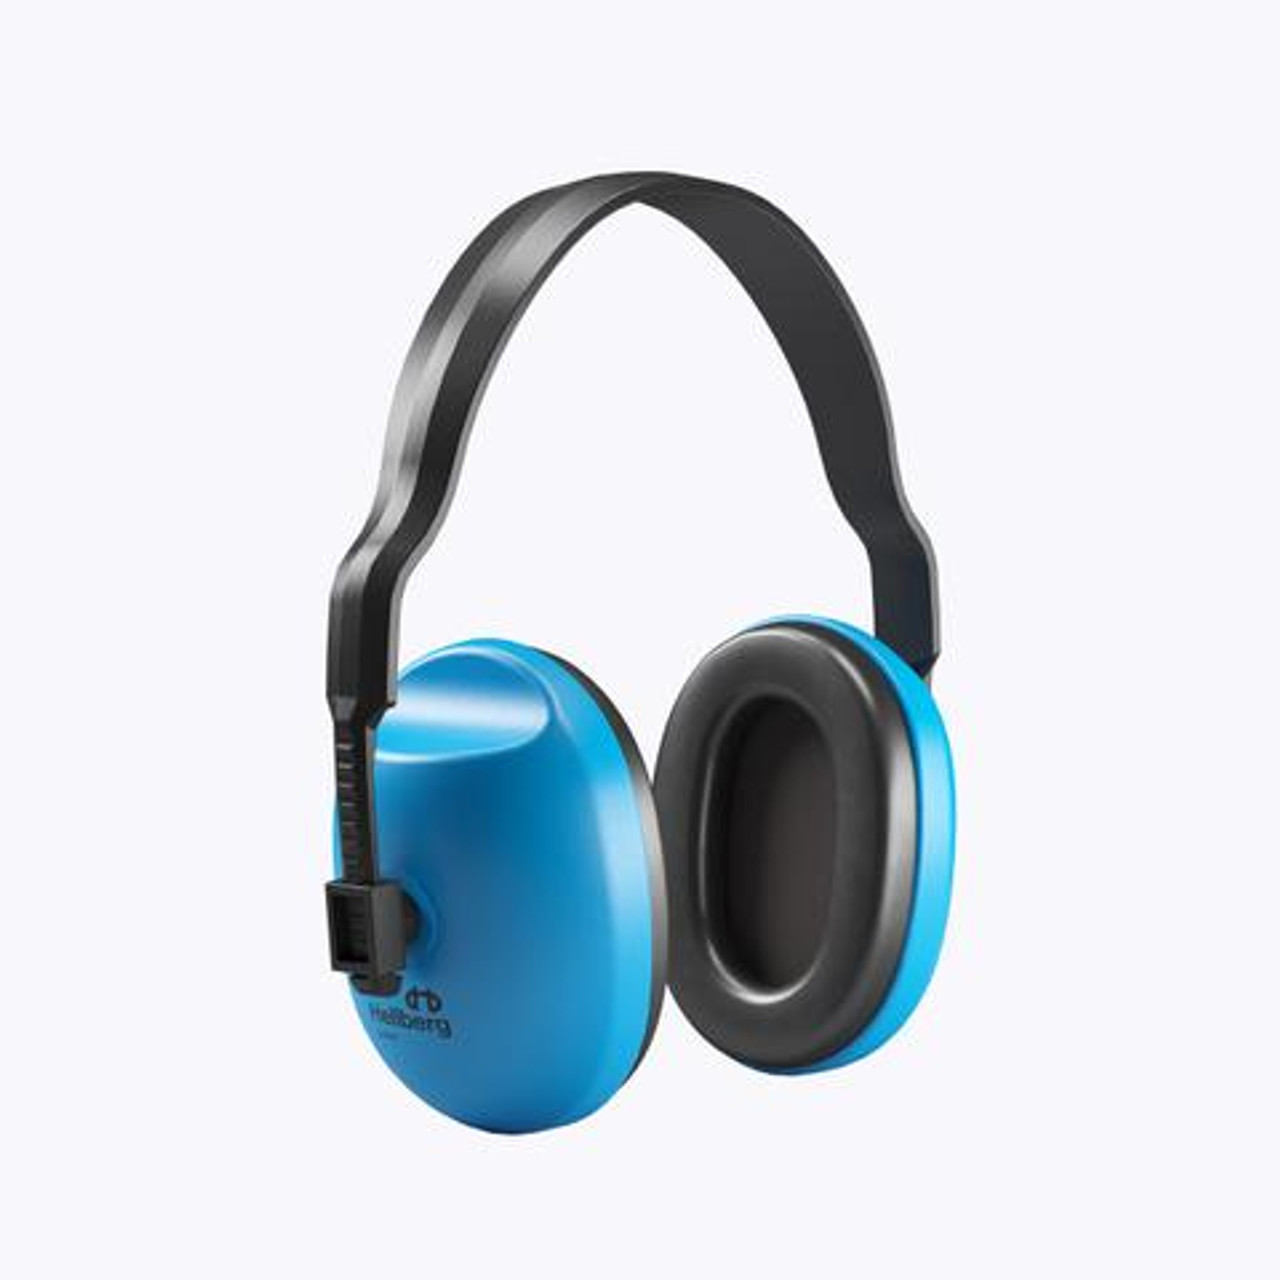 HELLBERG Ear Muffs | Supplier of JUNIOR Blue Class 2 Earmuffs  for Headband, Young Children, Formula 1 and V8 Supercars, Earmuffs for Workshop, Music Concerts and at Home